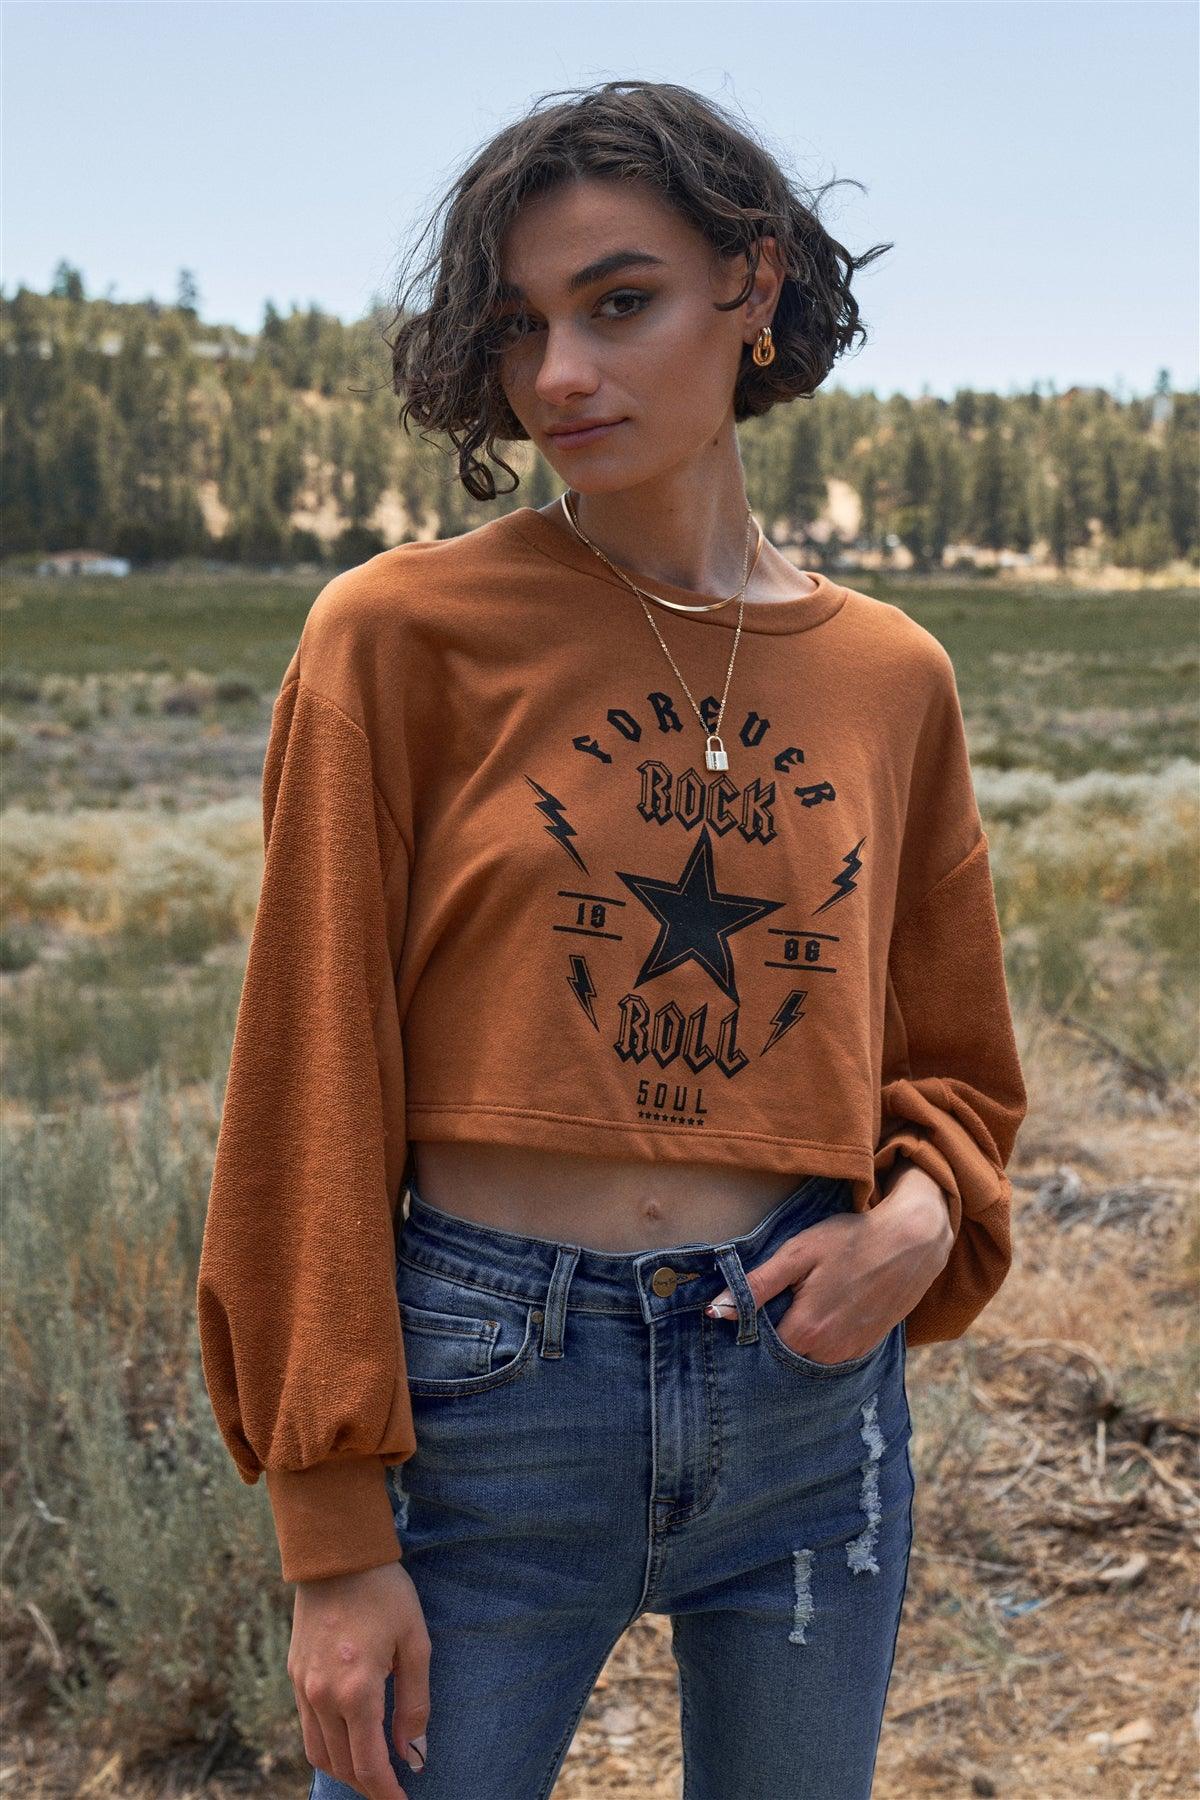 "Forever Rock 'n' Roll" Camel Cropped Long Balloon Sleeve Crew Neck Top /3-2-1